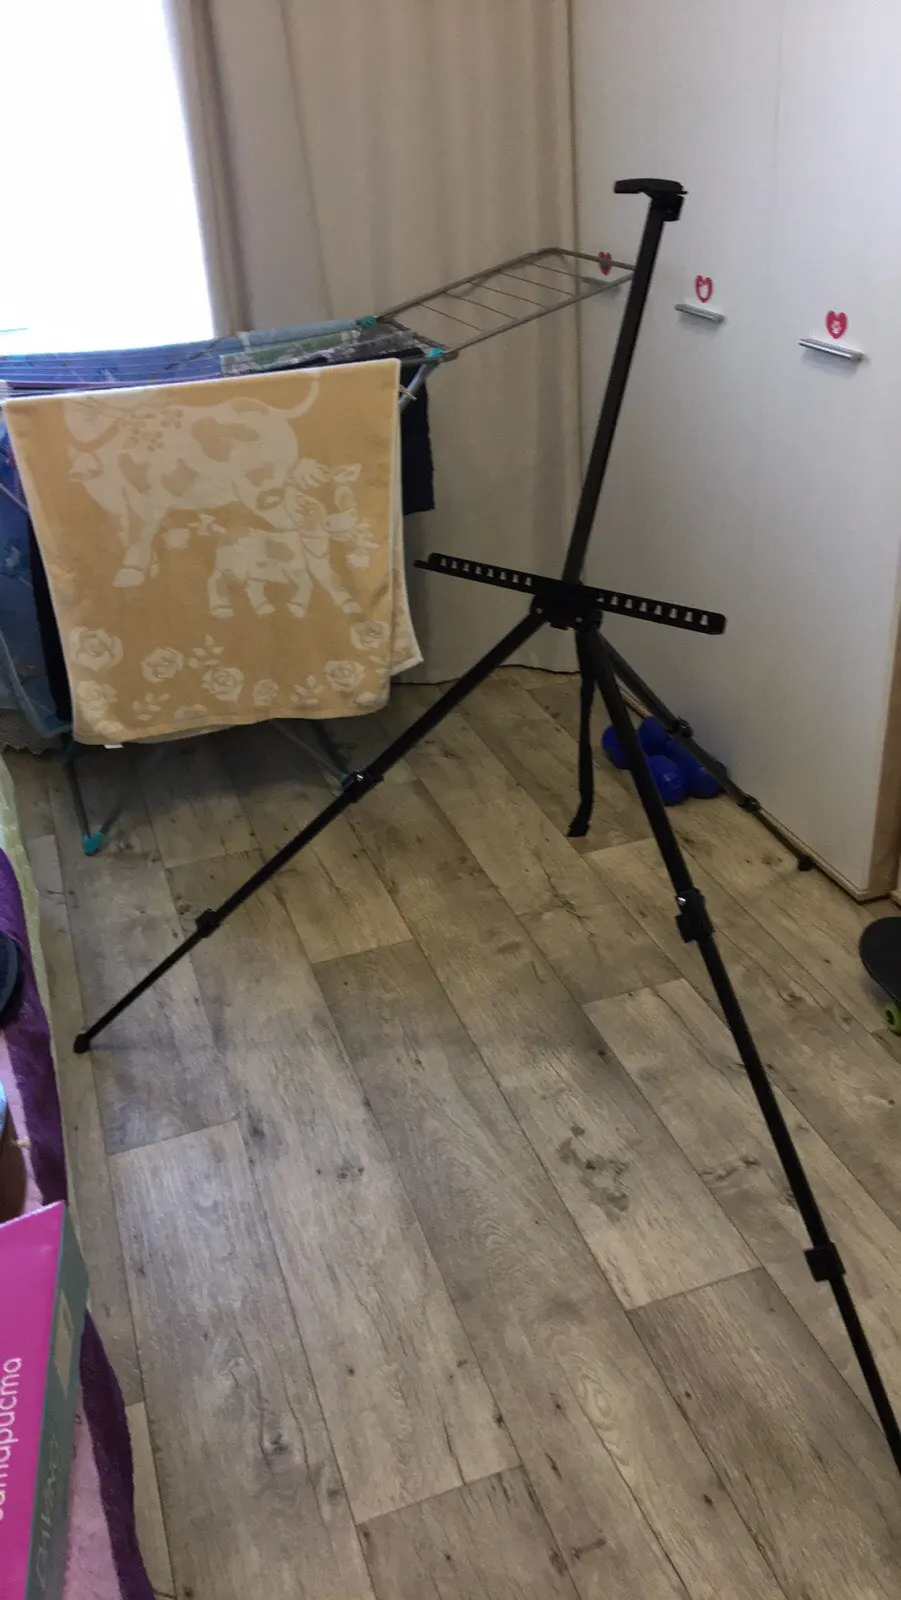 Portable Adjustable Metal Sketch Easel Stand Foldable Travel Easel Aluminum  Alloy Easel Sketch Drawing For Artist Art Supplies